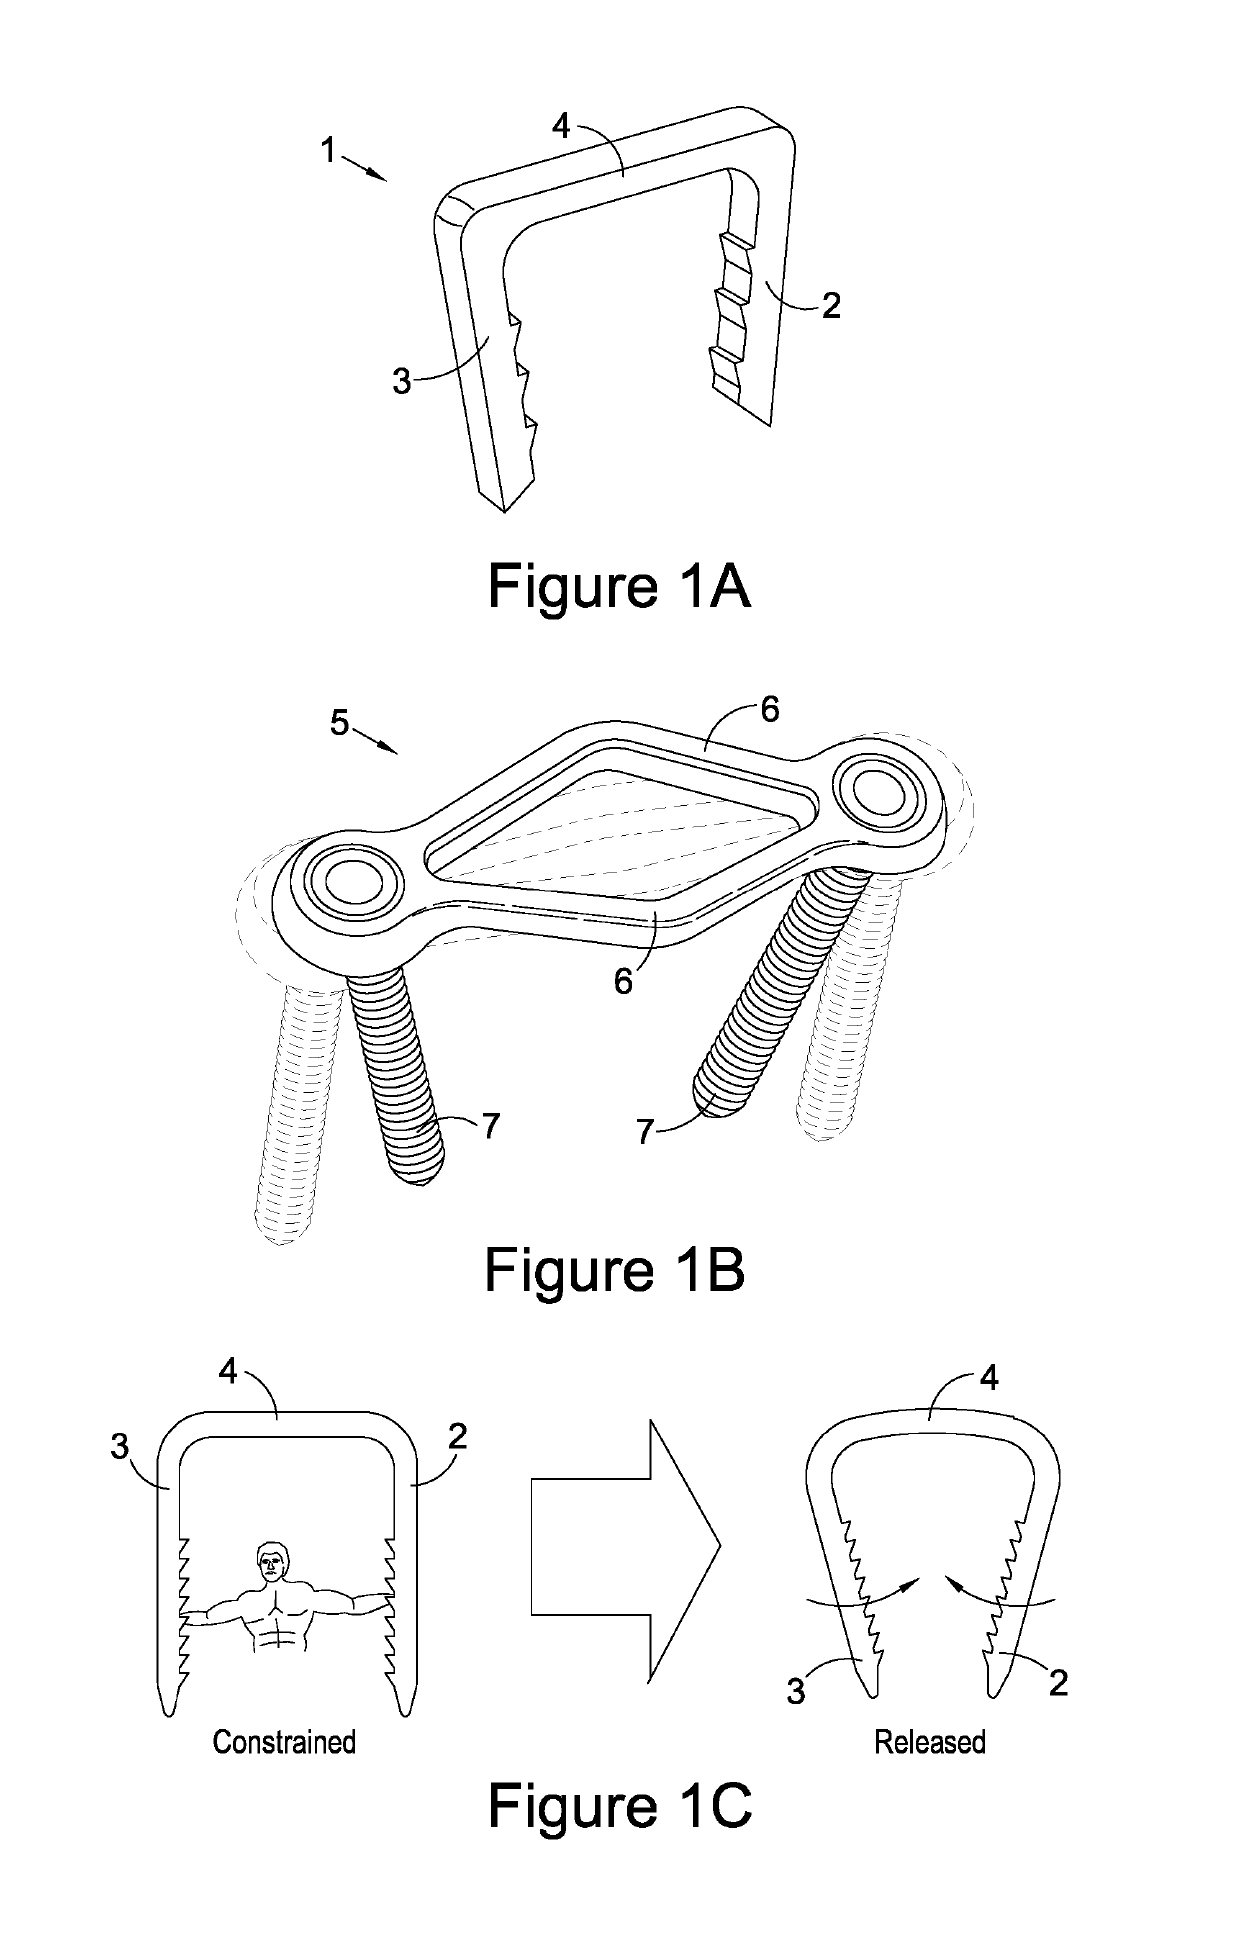 Bone ties and staples for use in orthopaedic surgery